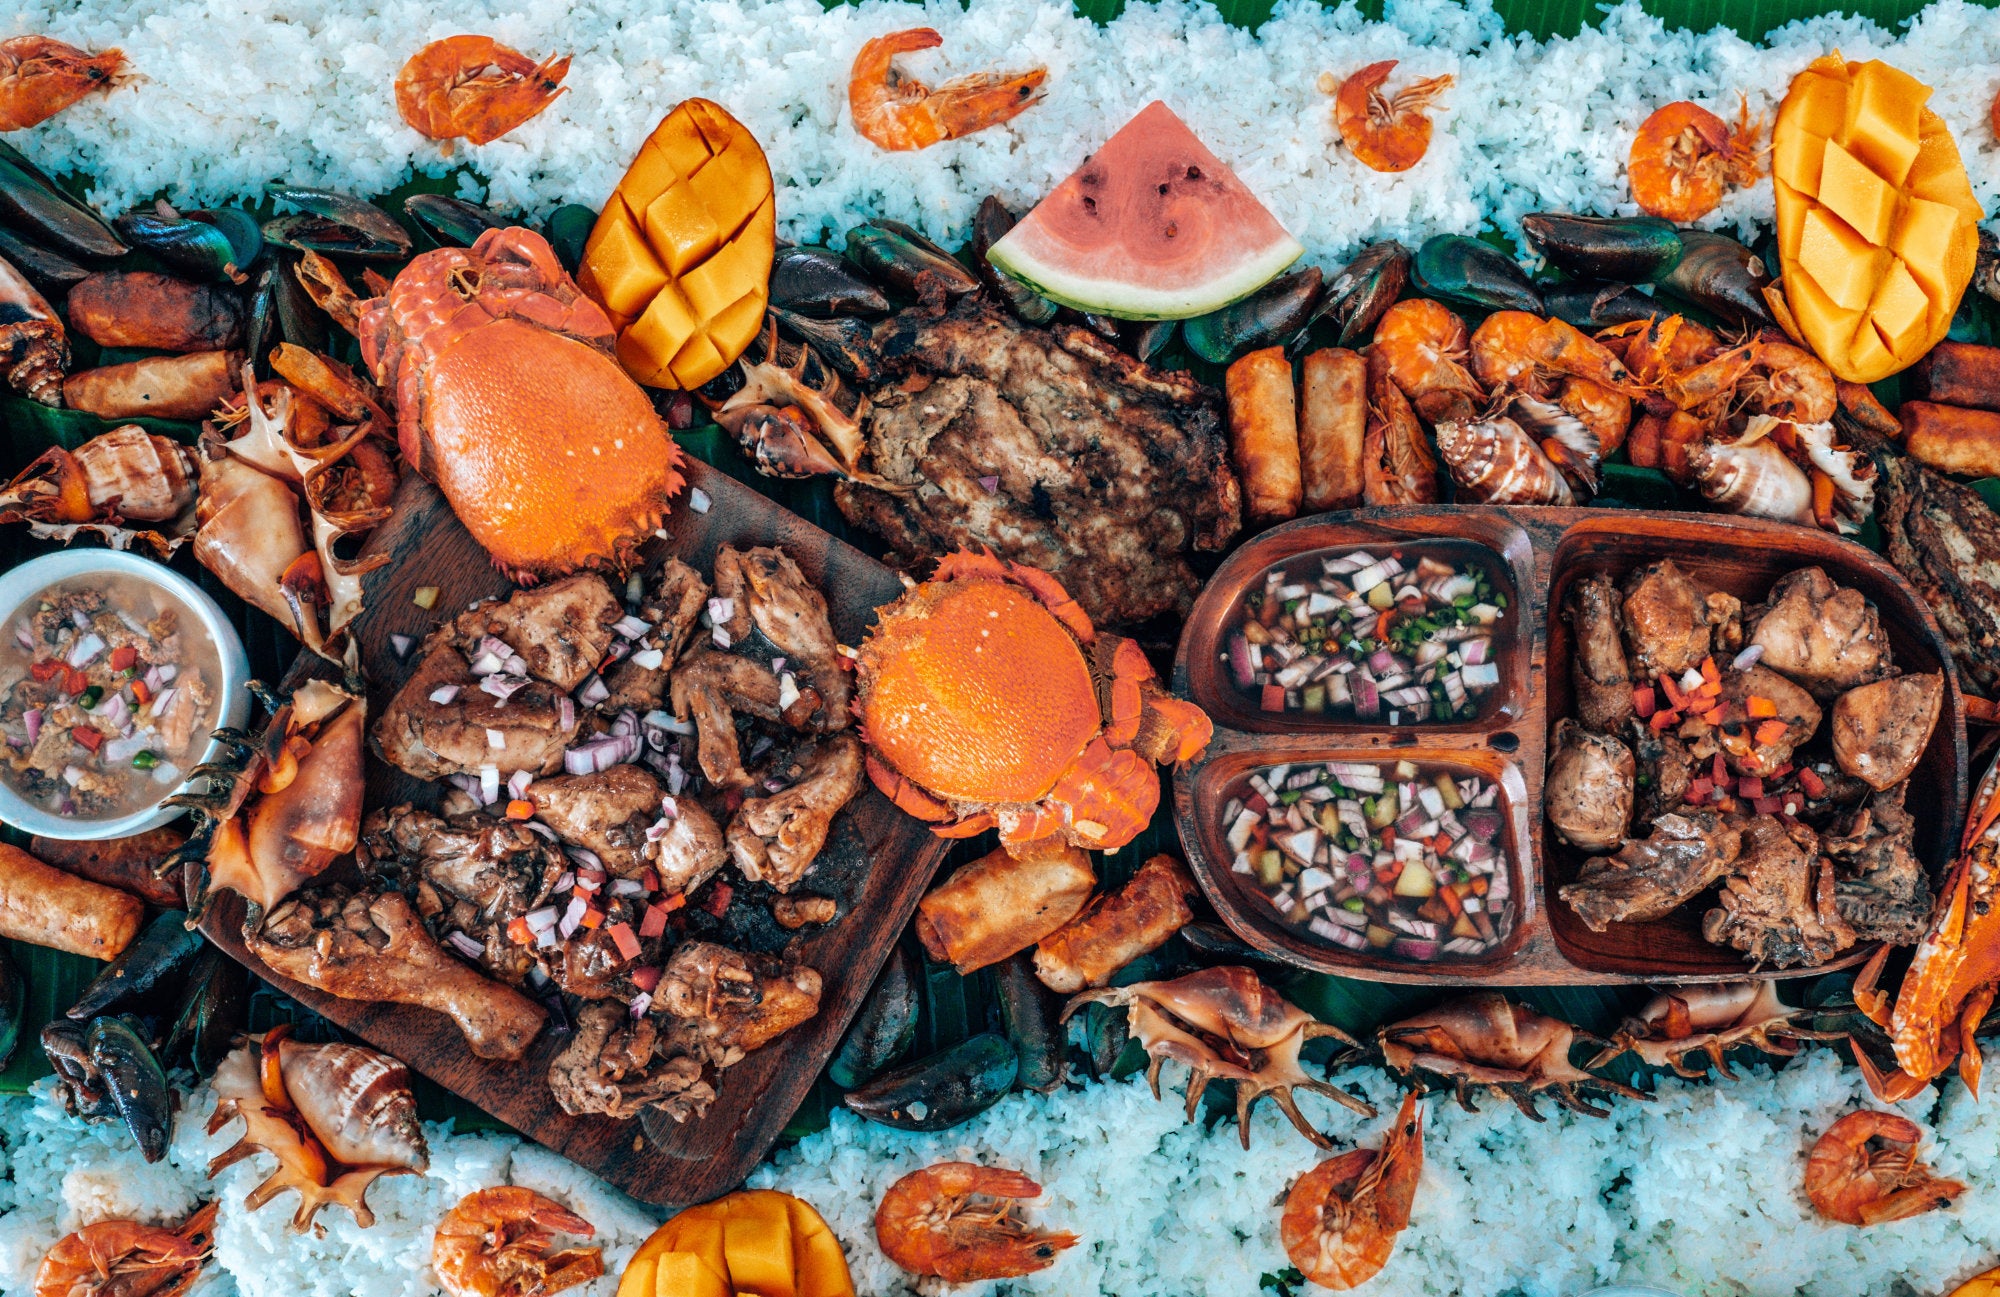 A Filipino Kamayan feast spread out over banana leaves on a table.